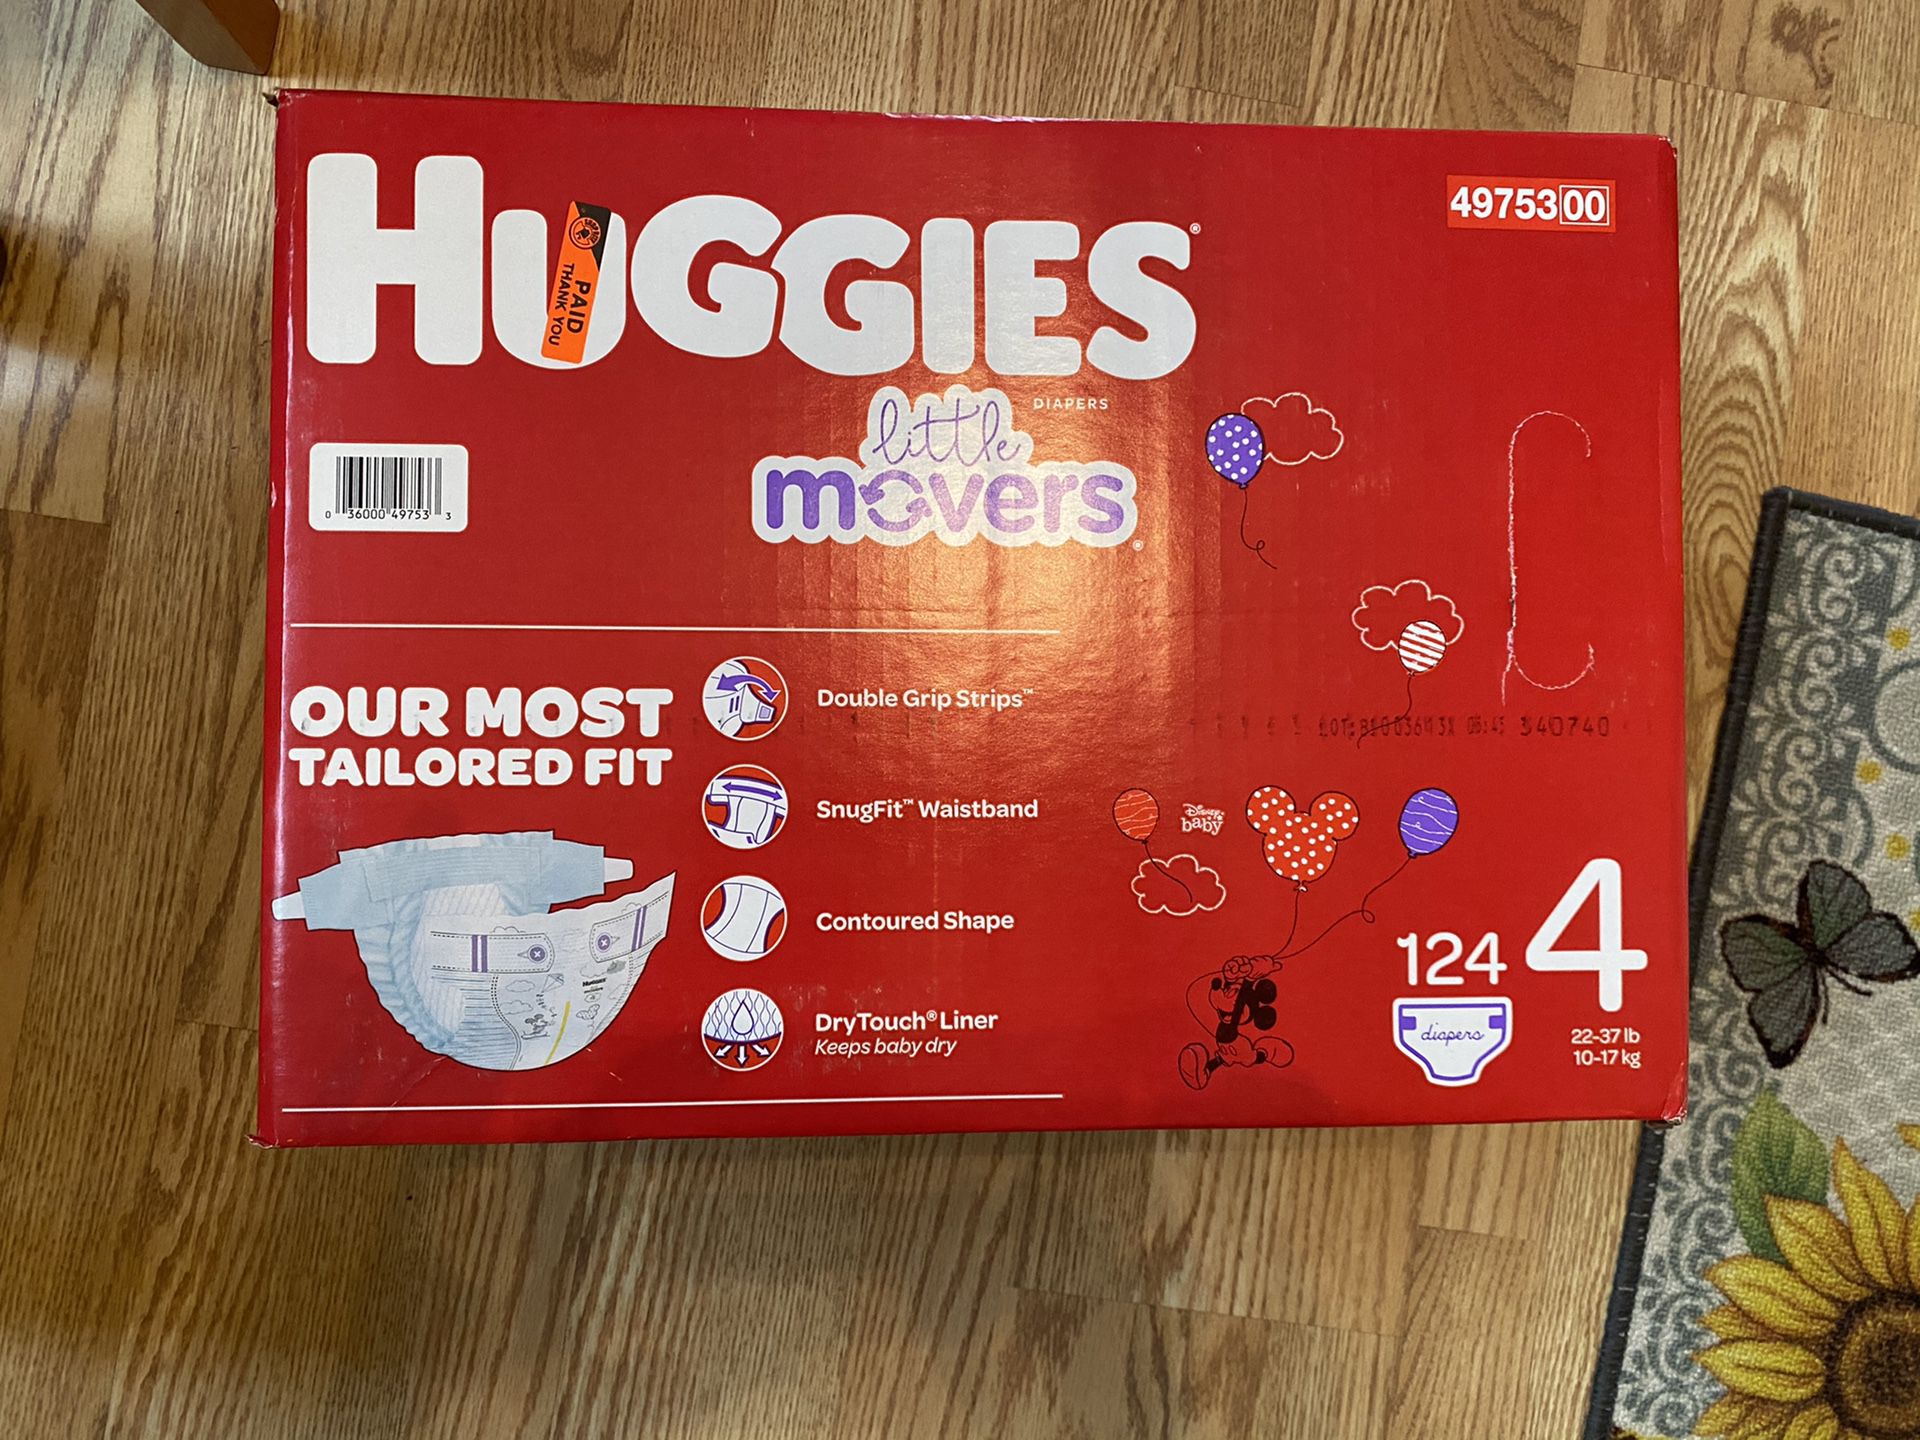 Huggies Diapers size 4. 124 diapers in a never opened box.